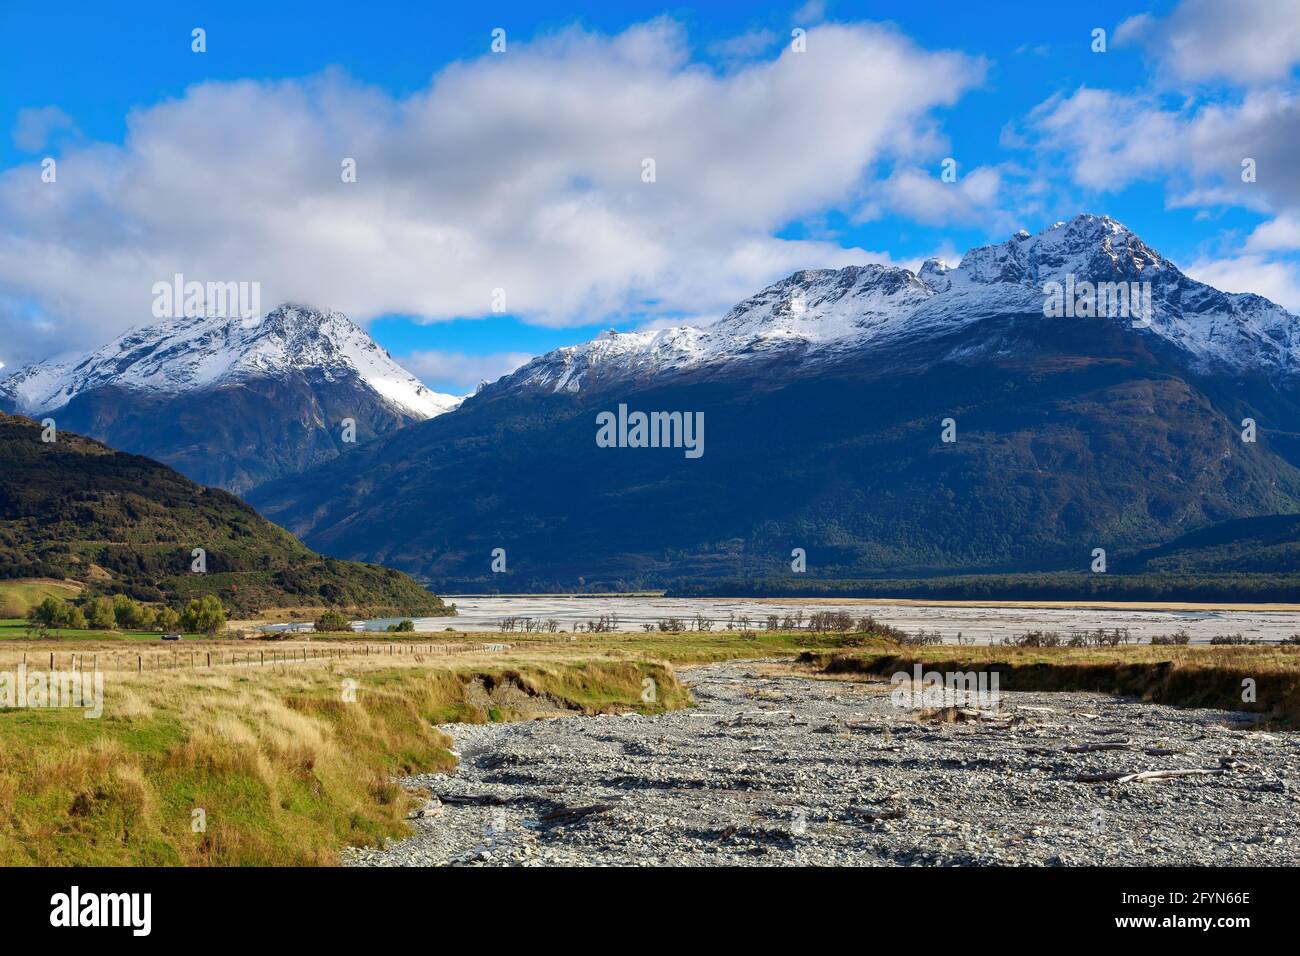 The Humboldt Mountains, part of the Southern Alps in the South Island of New Zealand, seen from the Dart River valley Stock Photo